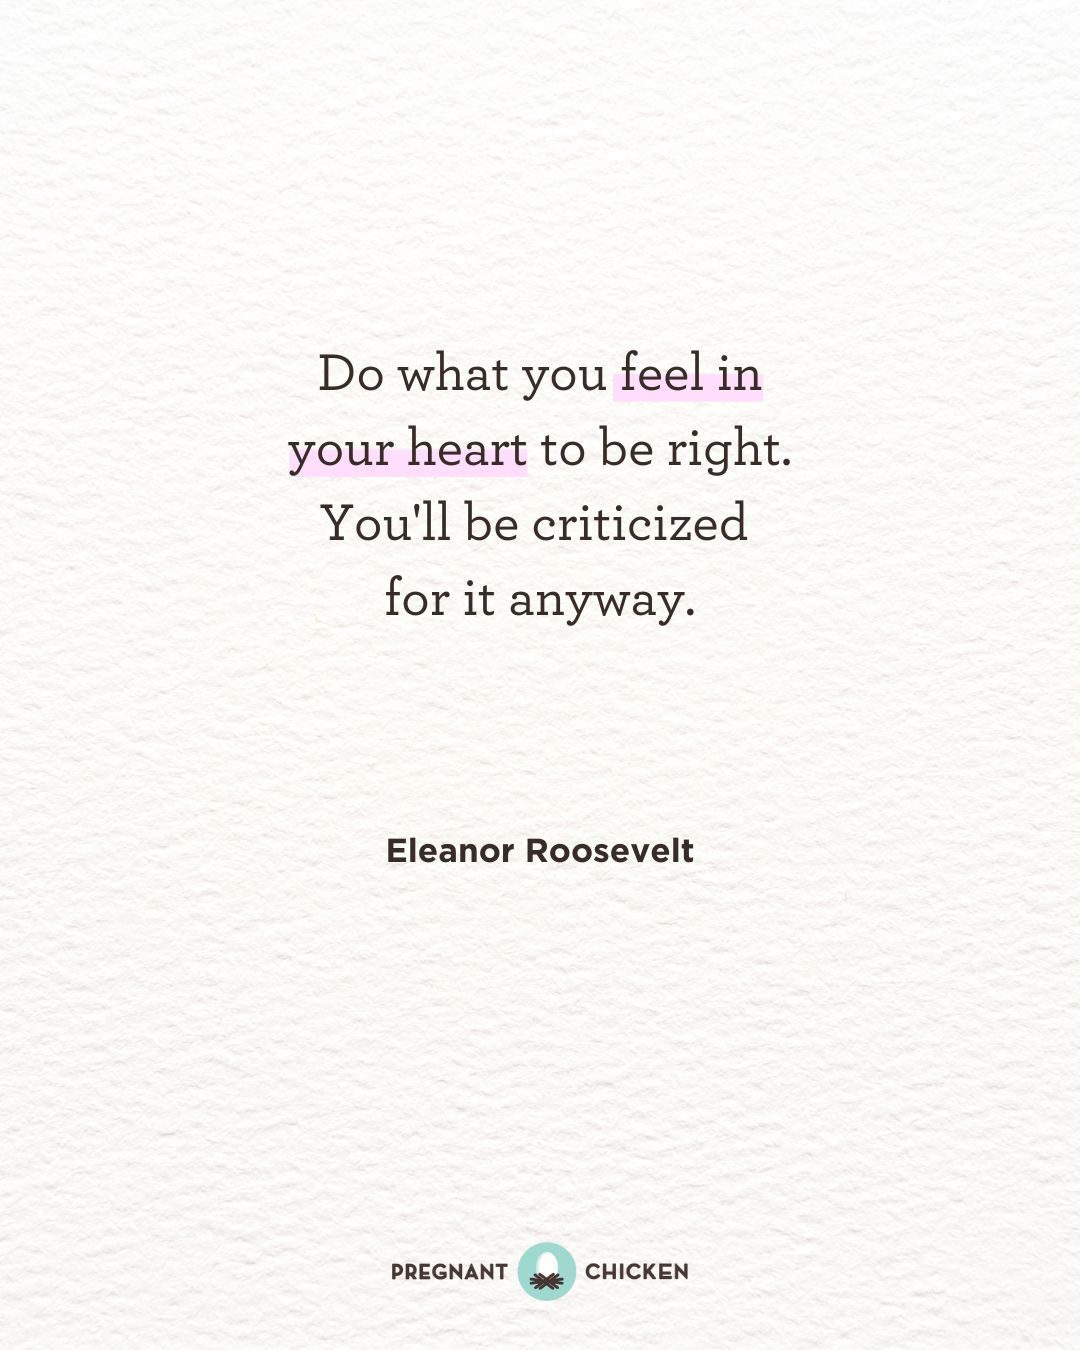 Do what you feel in your heart to be right. You'll be criticized for it anyway.